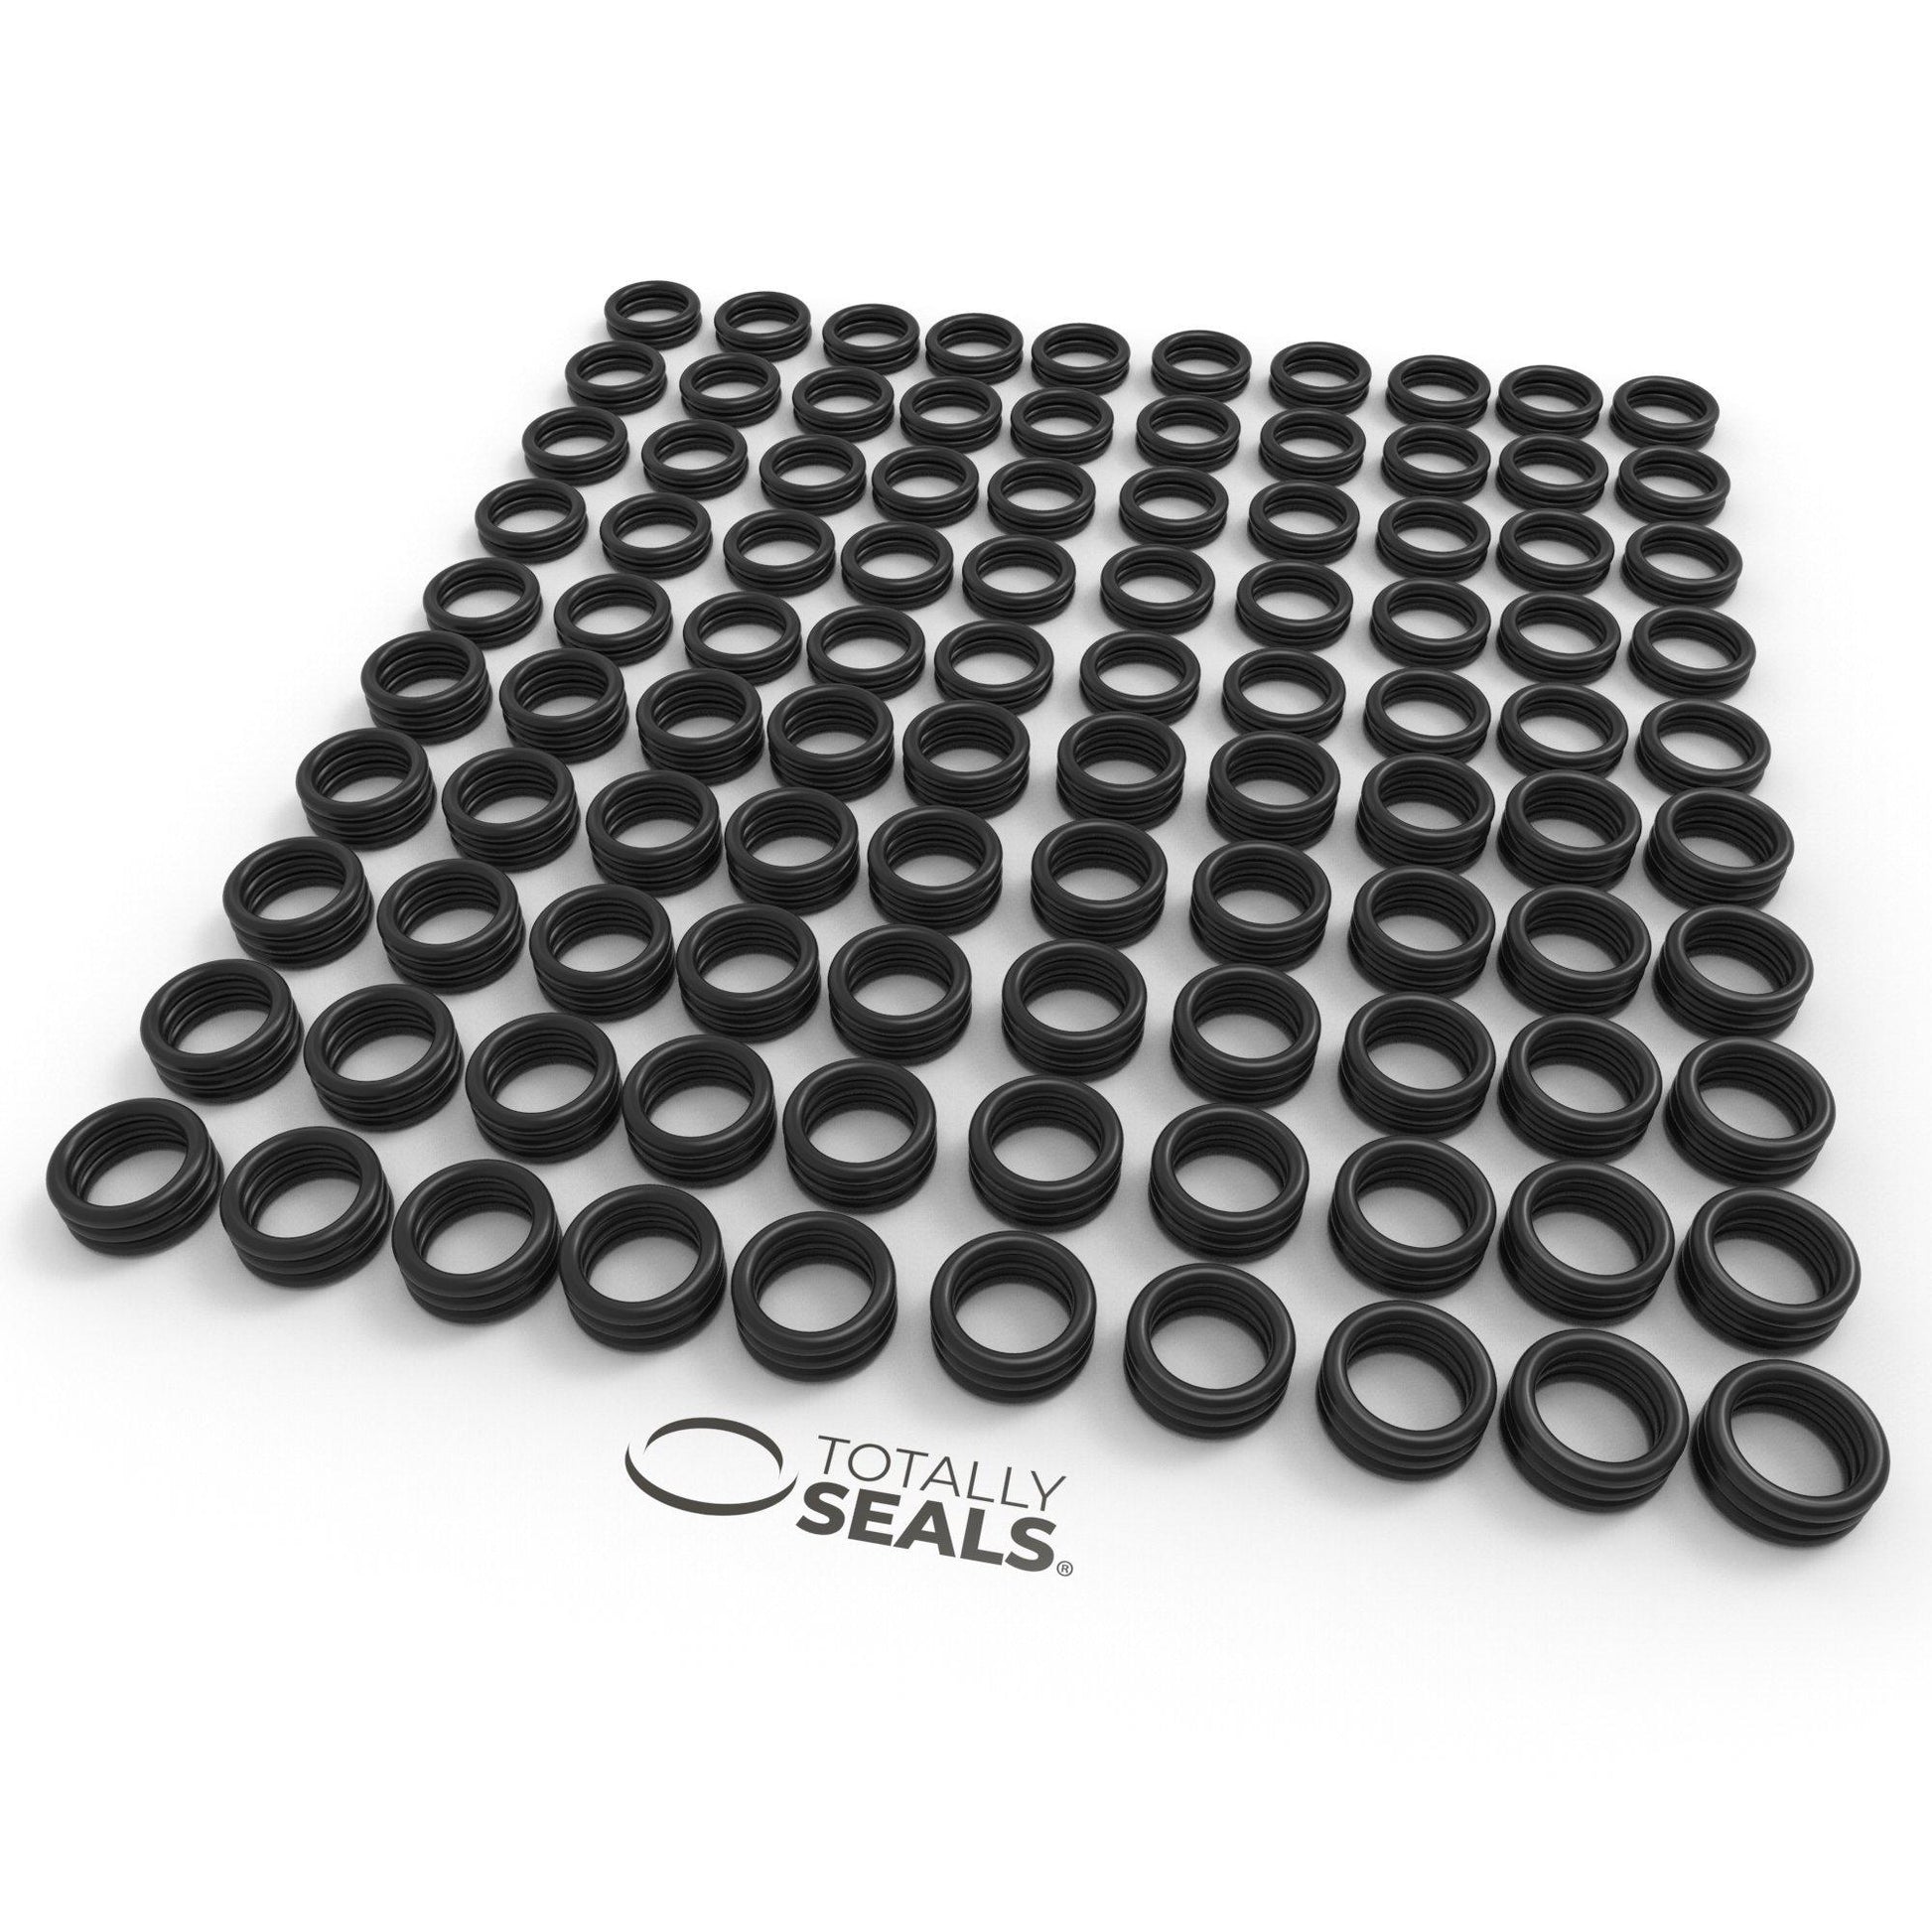 12mm x 1.5mm (15mm OD) Nitrile O-Rings - Totally Seals®